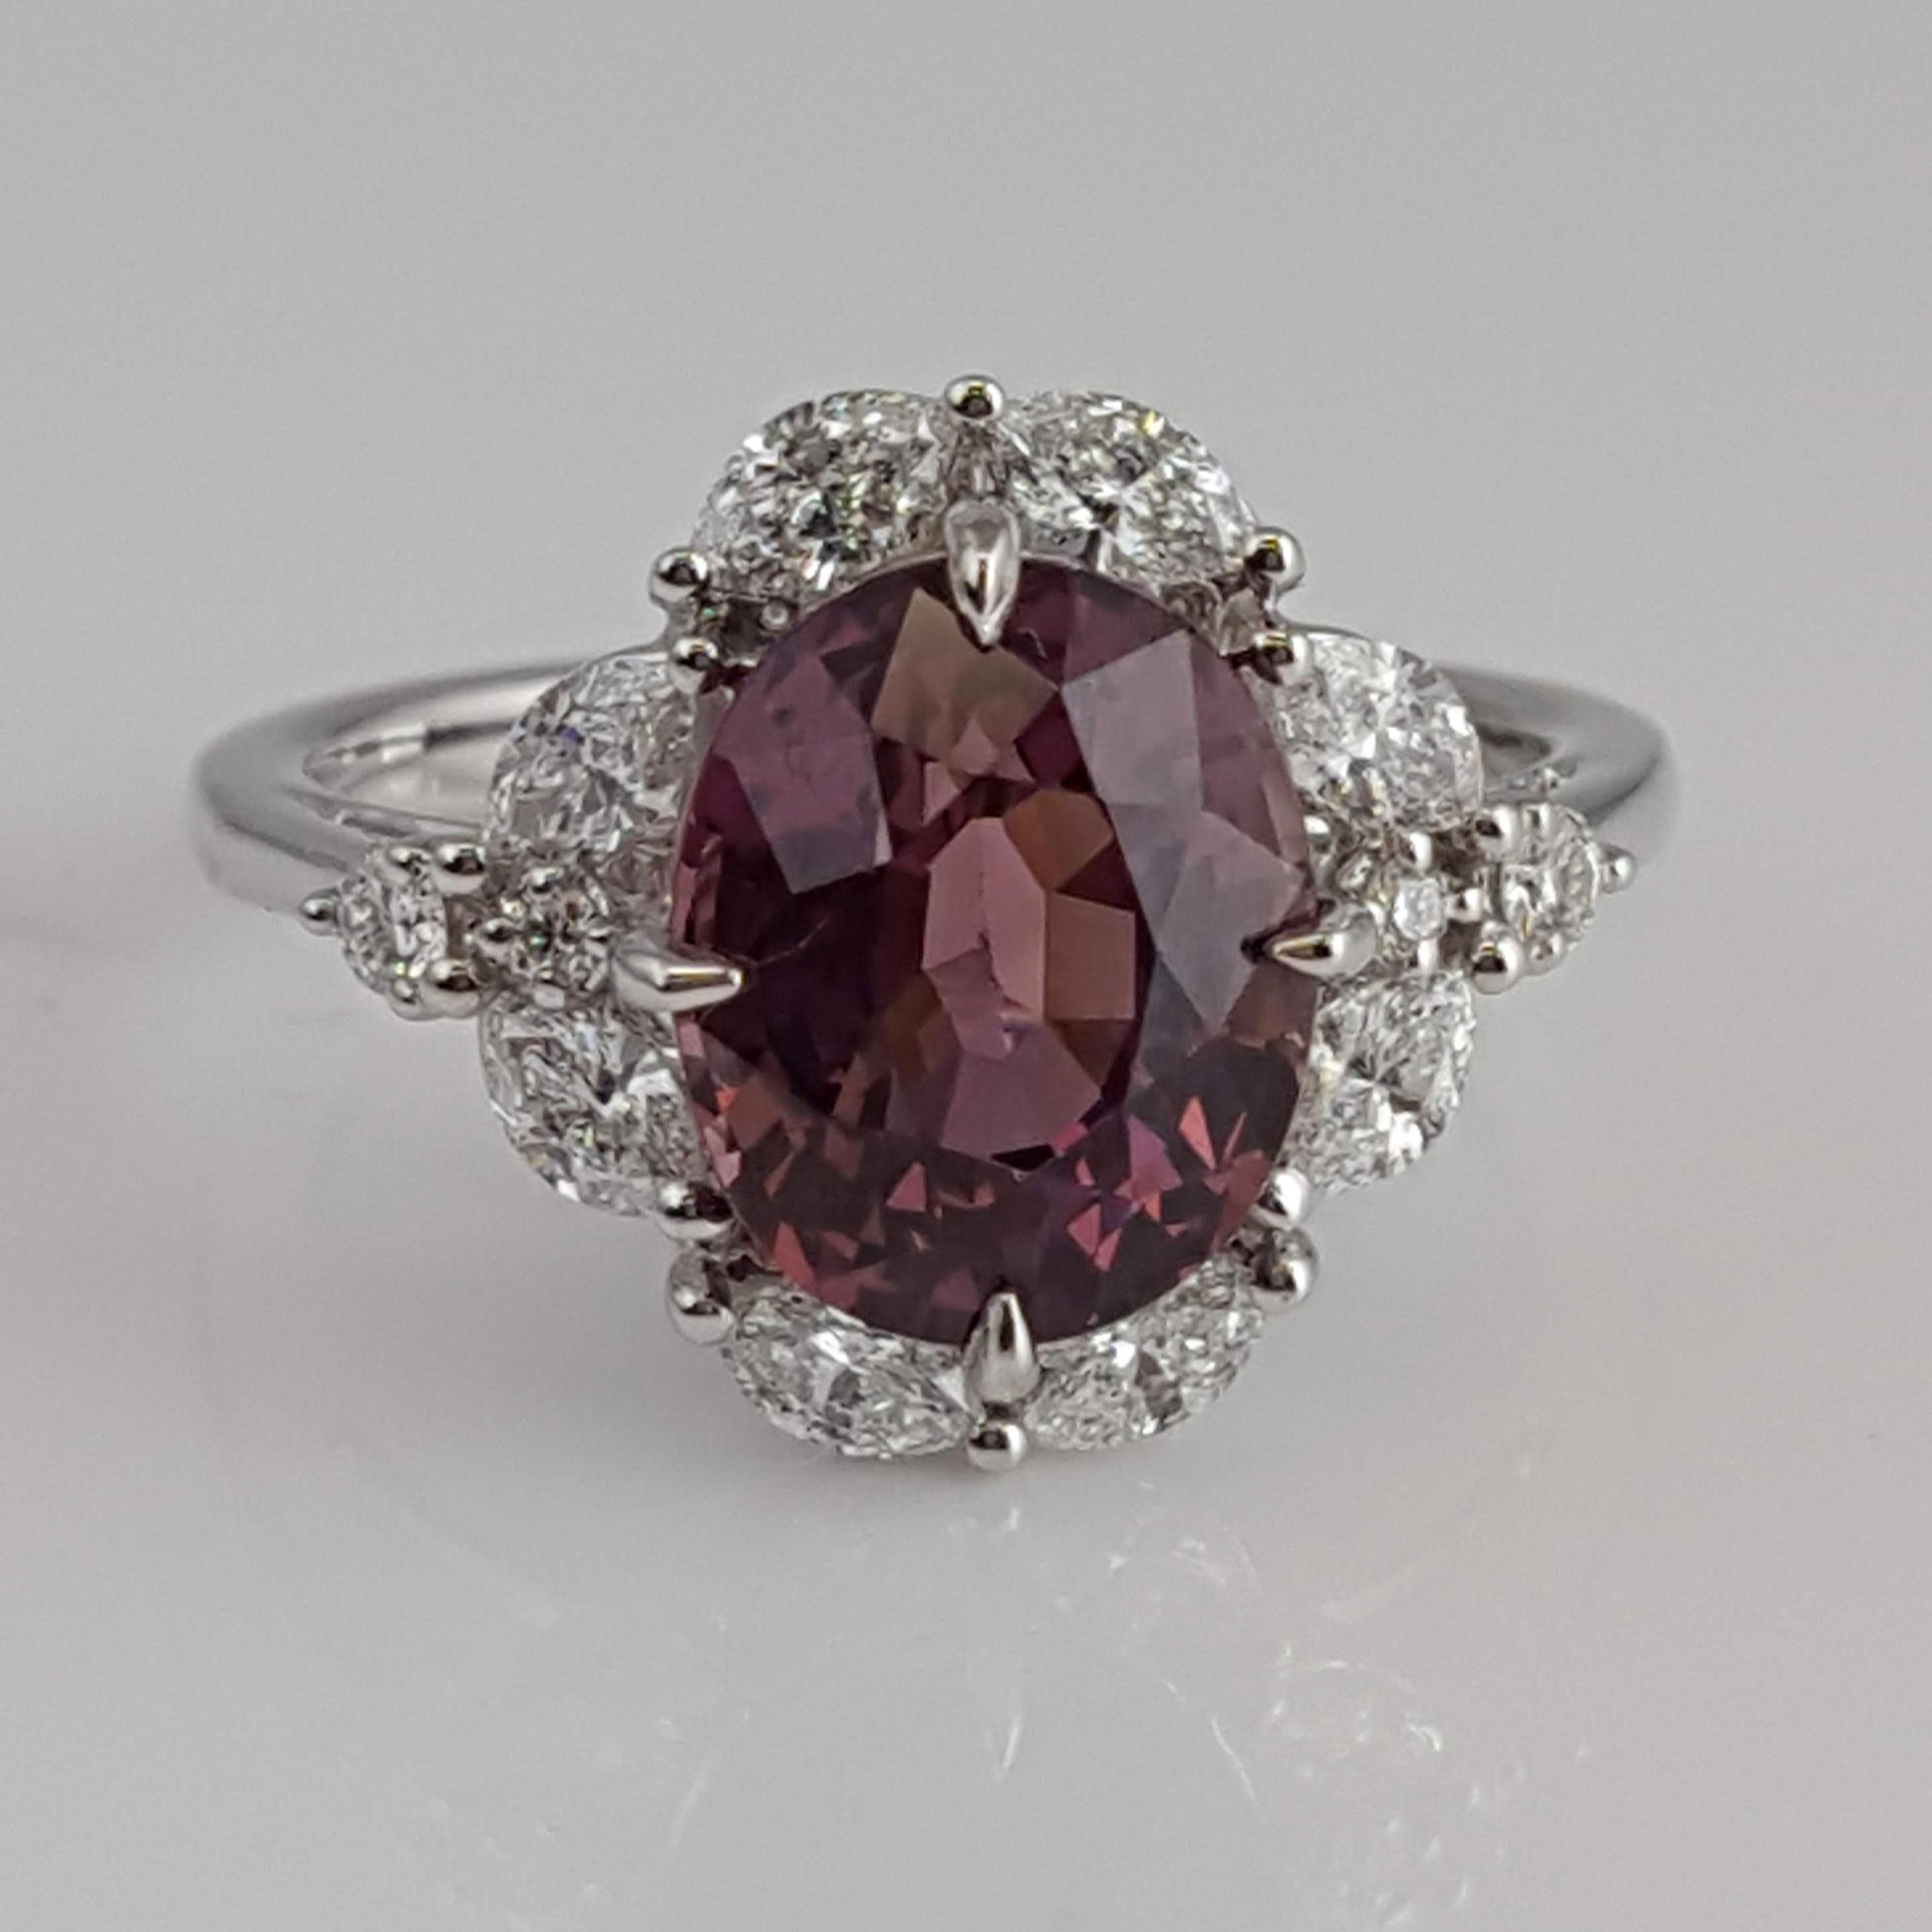 (DiamondTown) With a GIA Certified 4.19 carat oval cut exotic garnet center, set inside a halo of marquise cut white diamonds (total diamond weight 0.68 carats), this ring shines from every angle.

GIA Certification details (see photo):
The center